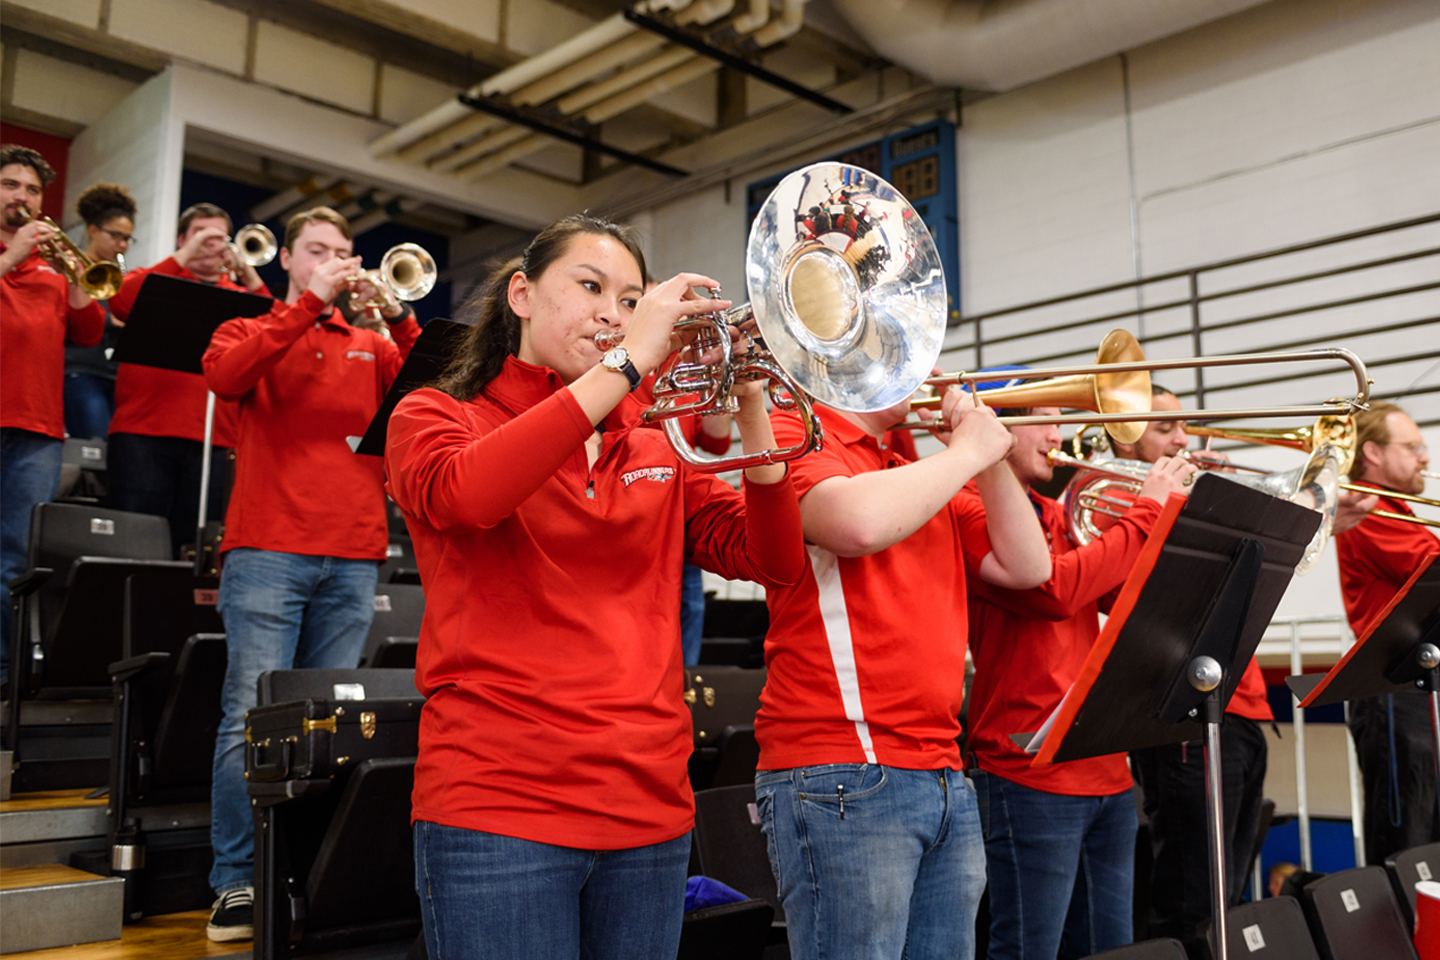 Group of pep band musicians in red playing in a basketball court